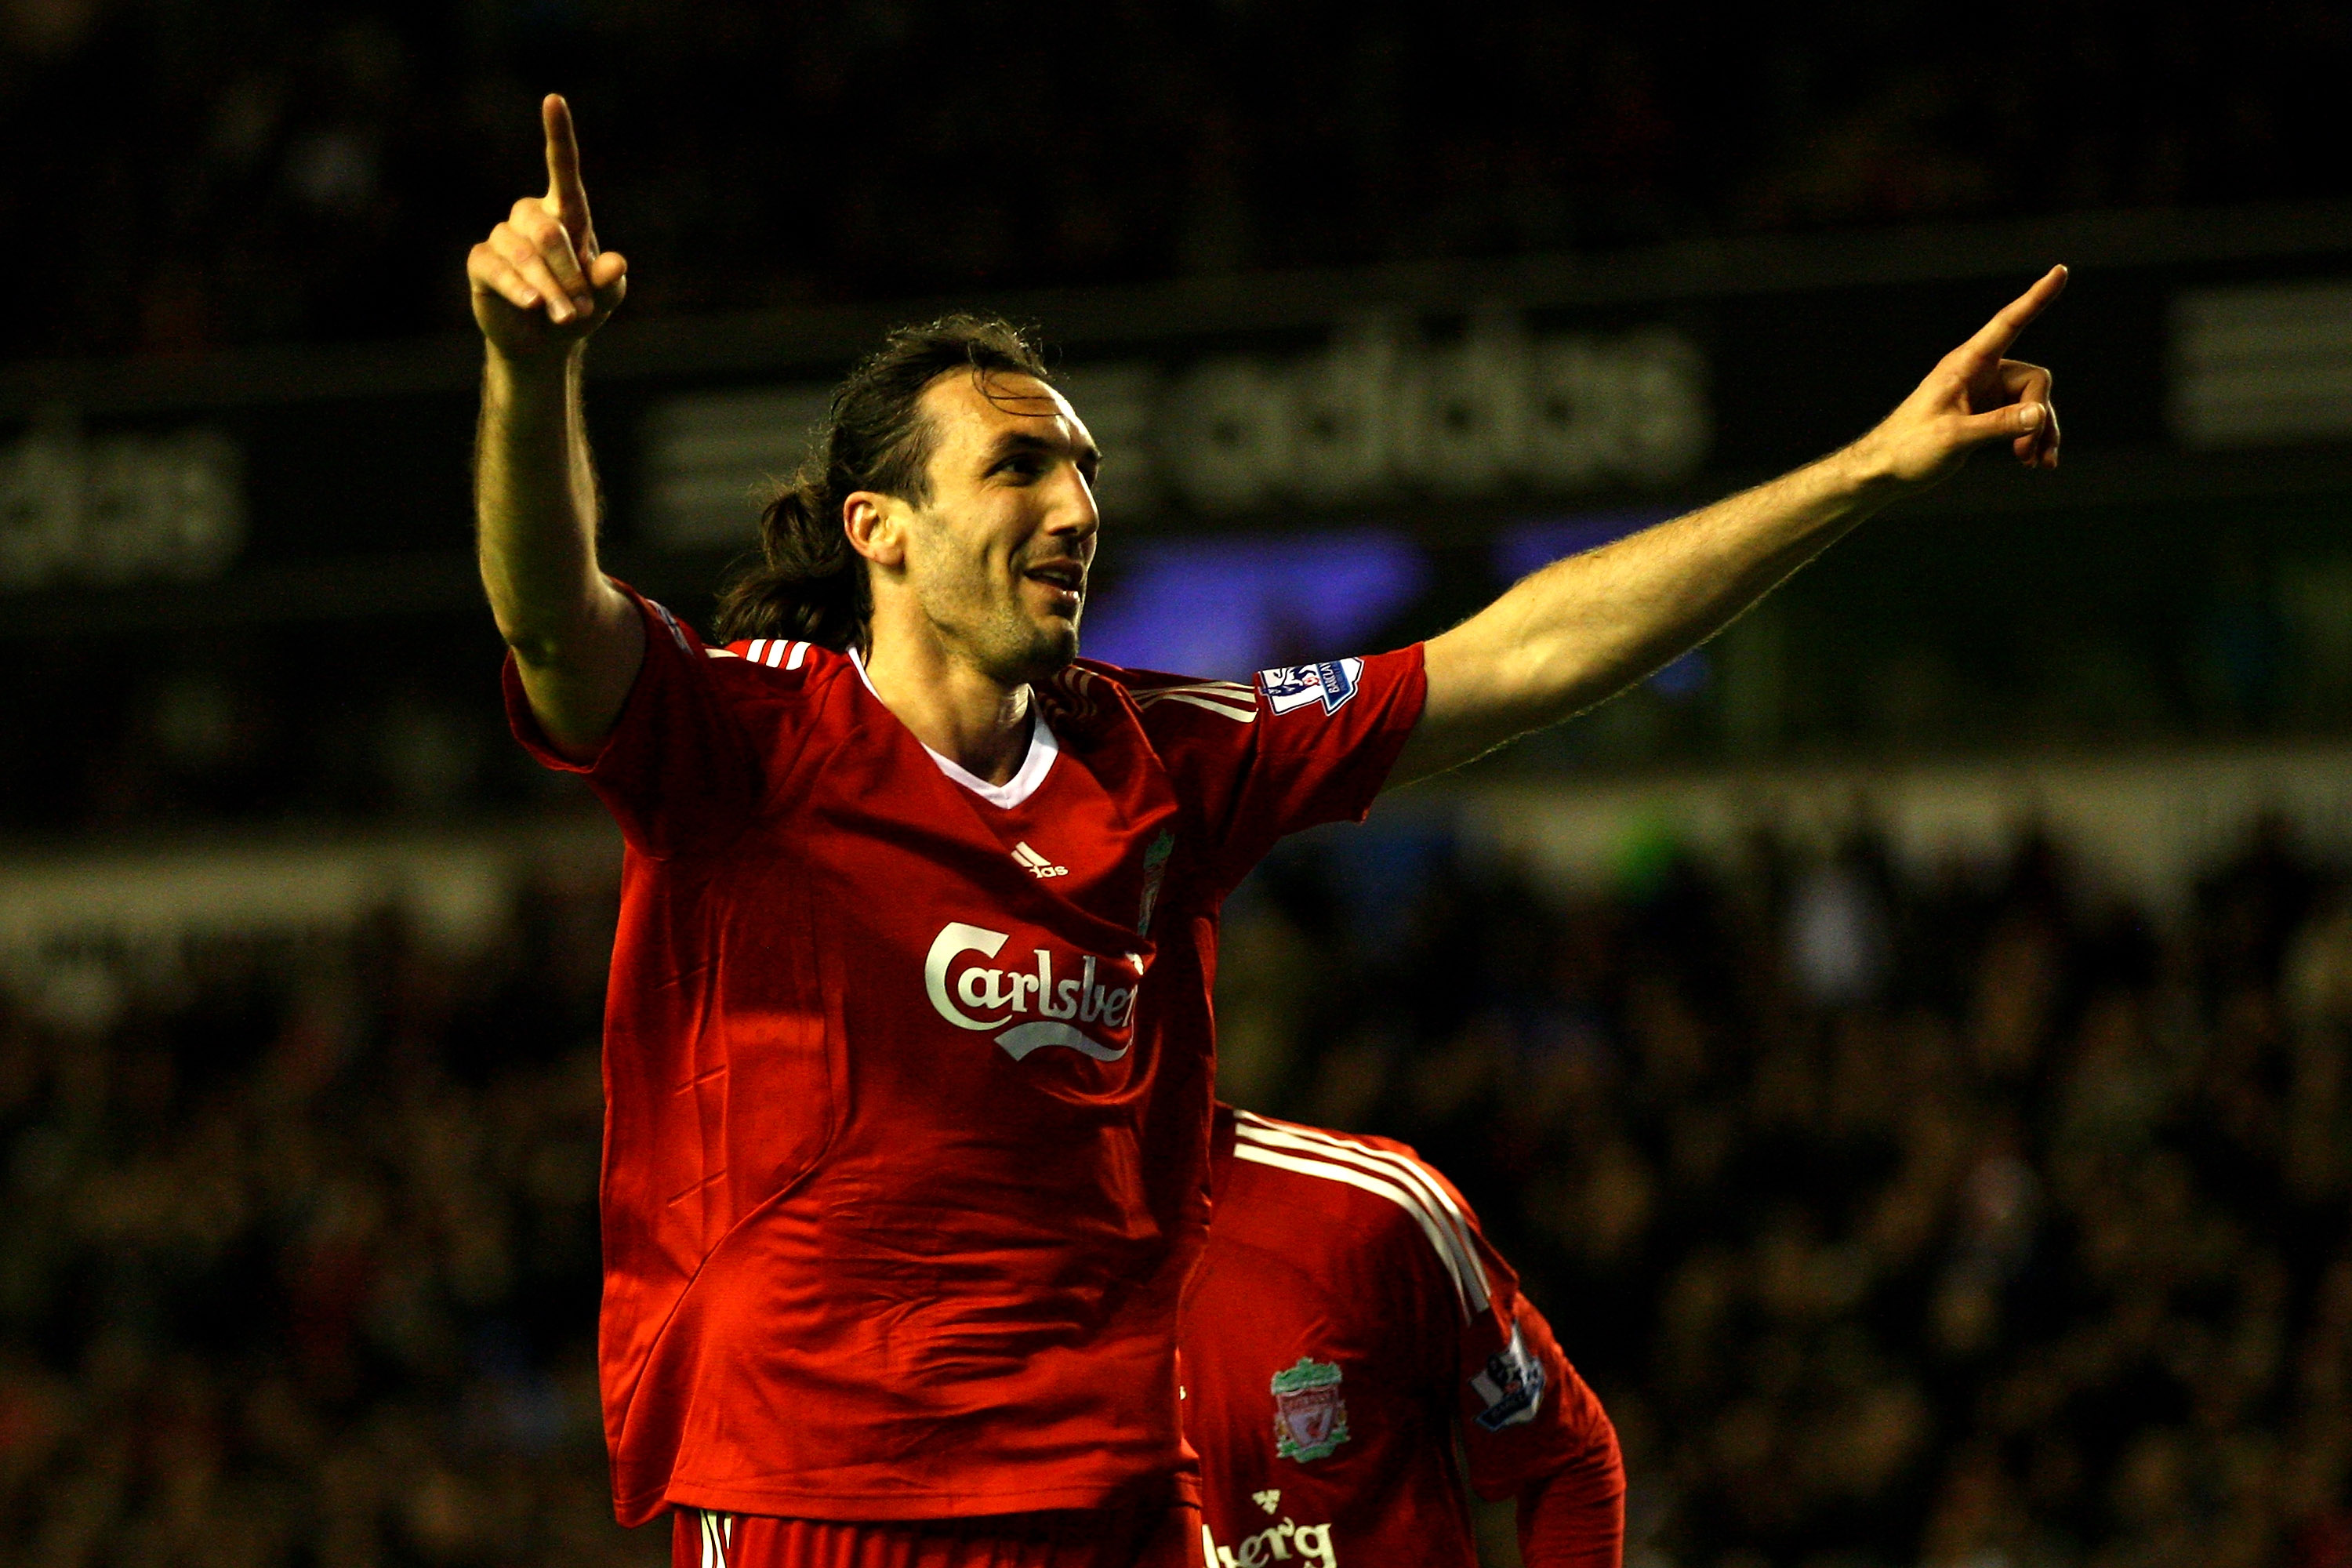 LIVERPOOL, ENGLAND - APRIL 19:  Sotiros Kyrgiakos of Liverpool celebrates scoring his team's third goal during the Barclays Premier League match between Liverpool and West Ham United at Anfield on April 19, 2010 in Liverpool, England.  (Photo by Clive Bru